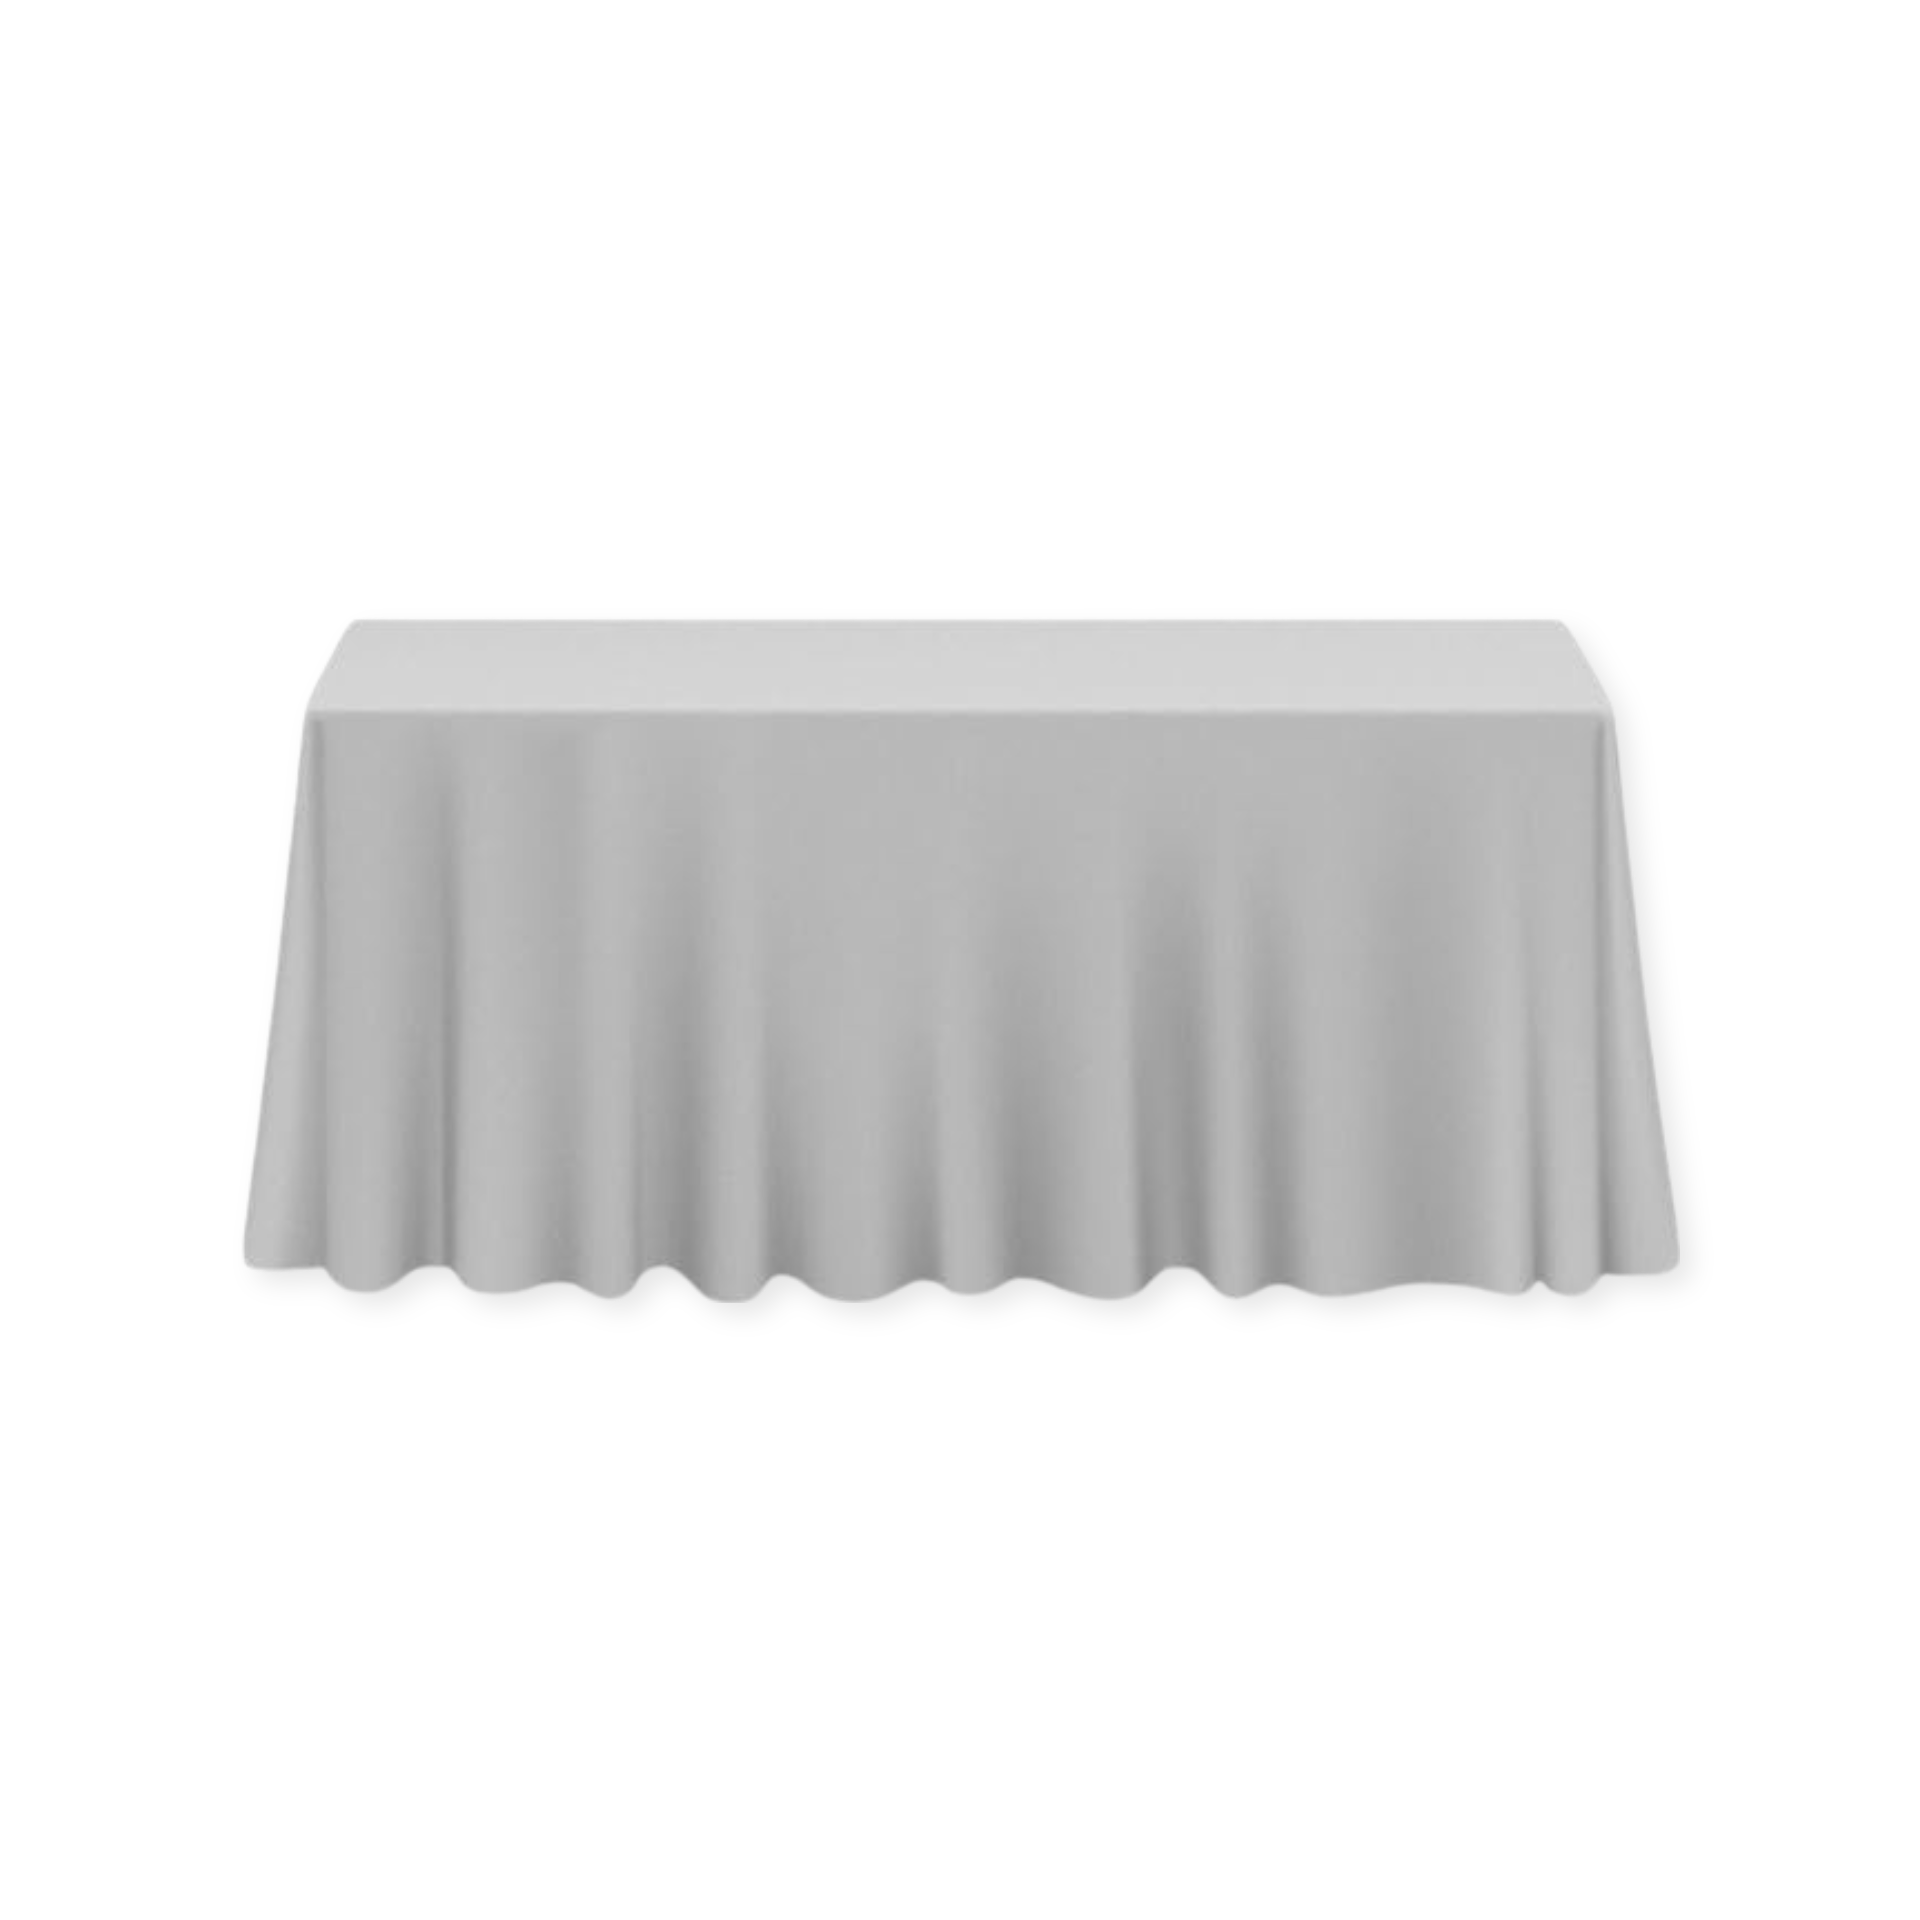 Tablecloth polyester rectangle grey commercial grade wedding party event rental panama city beach